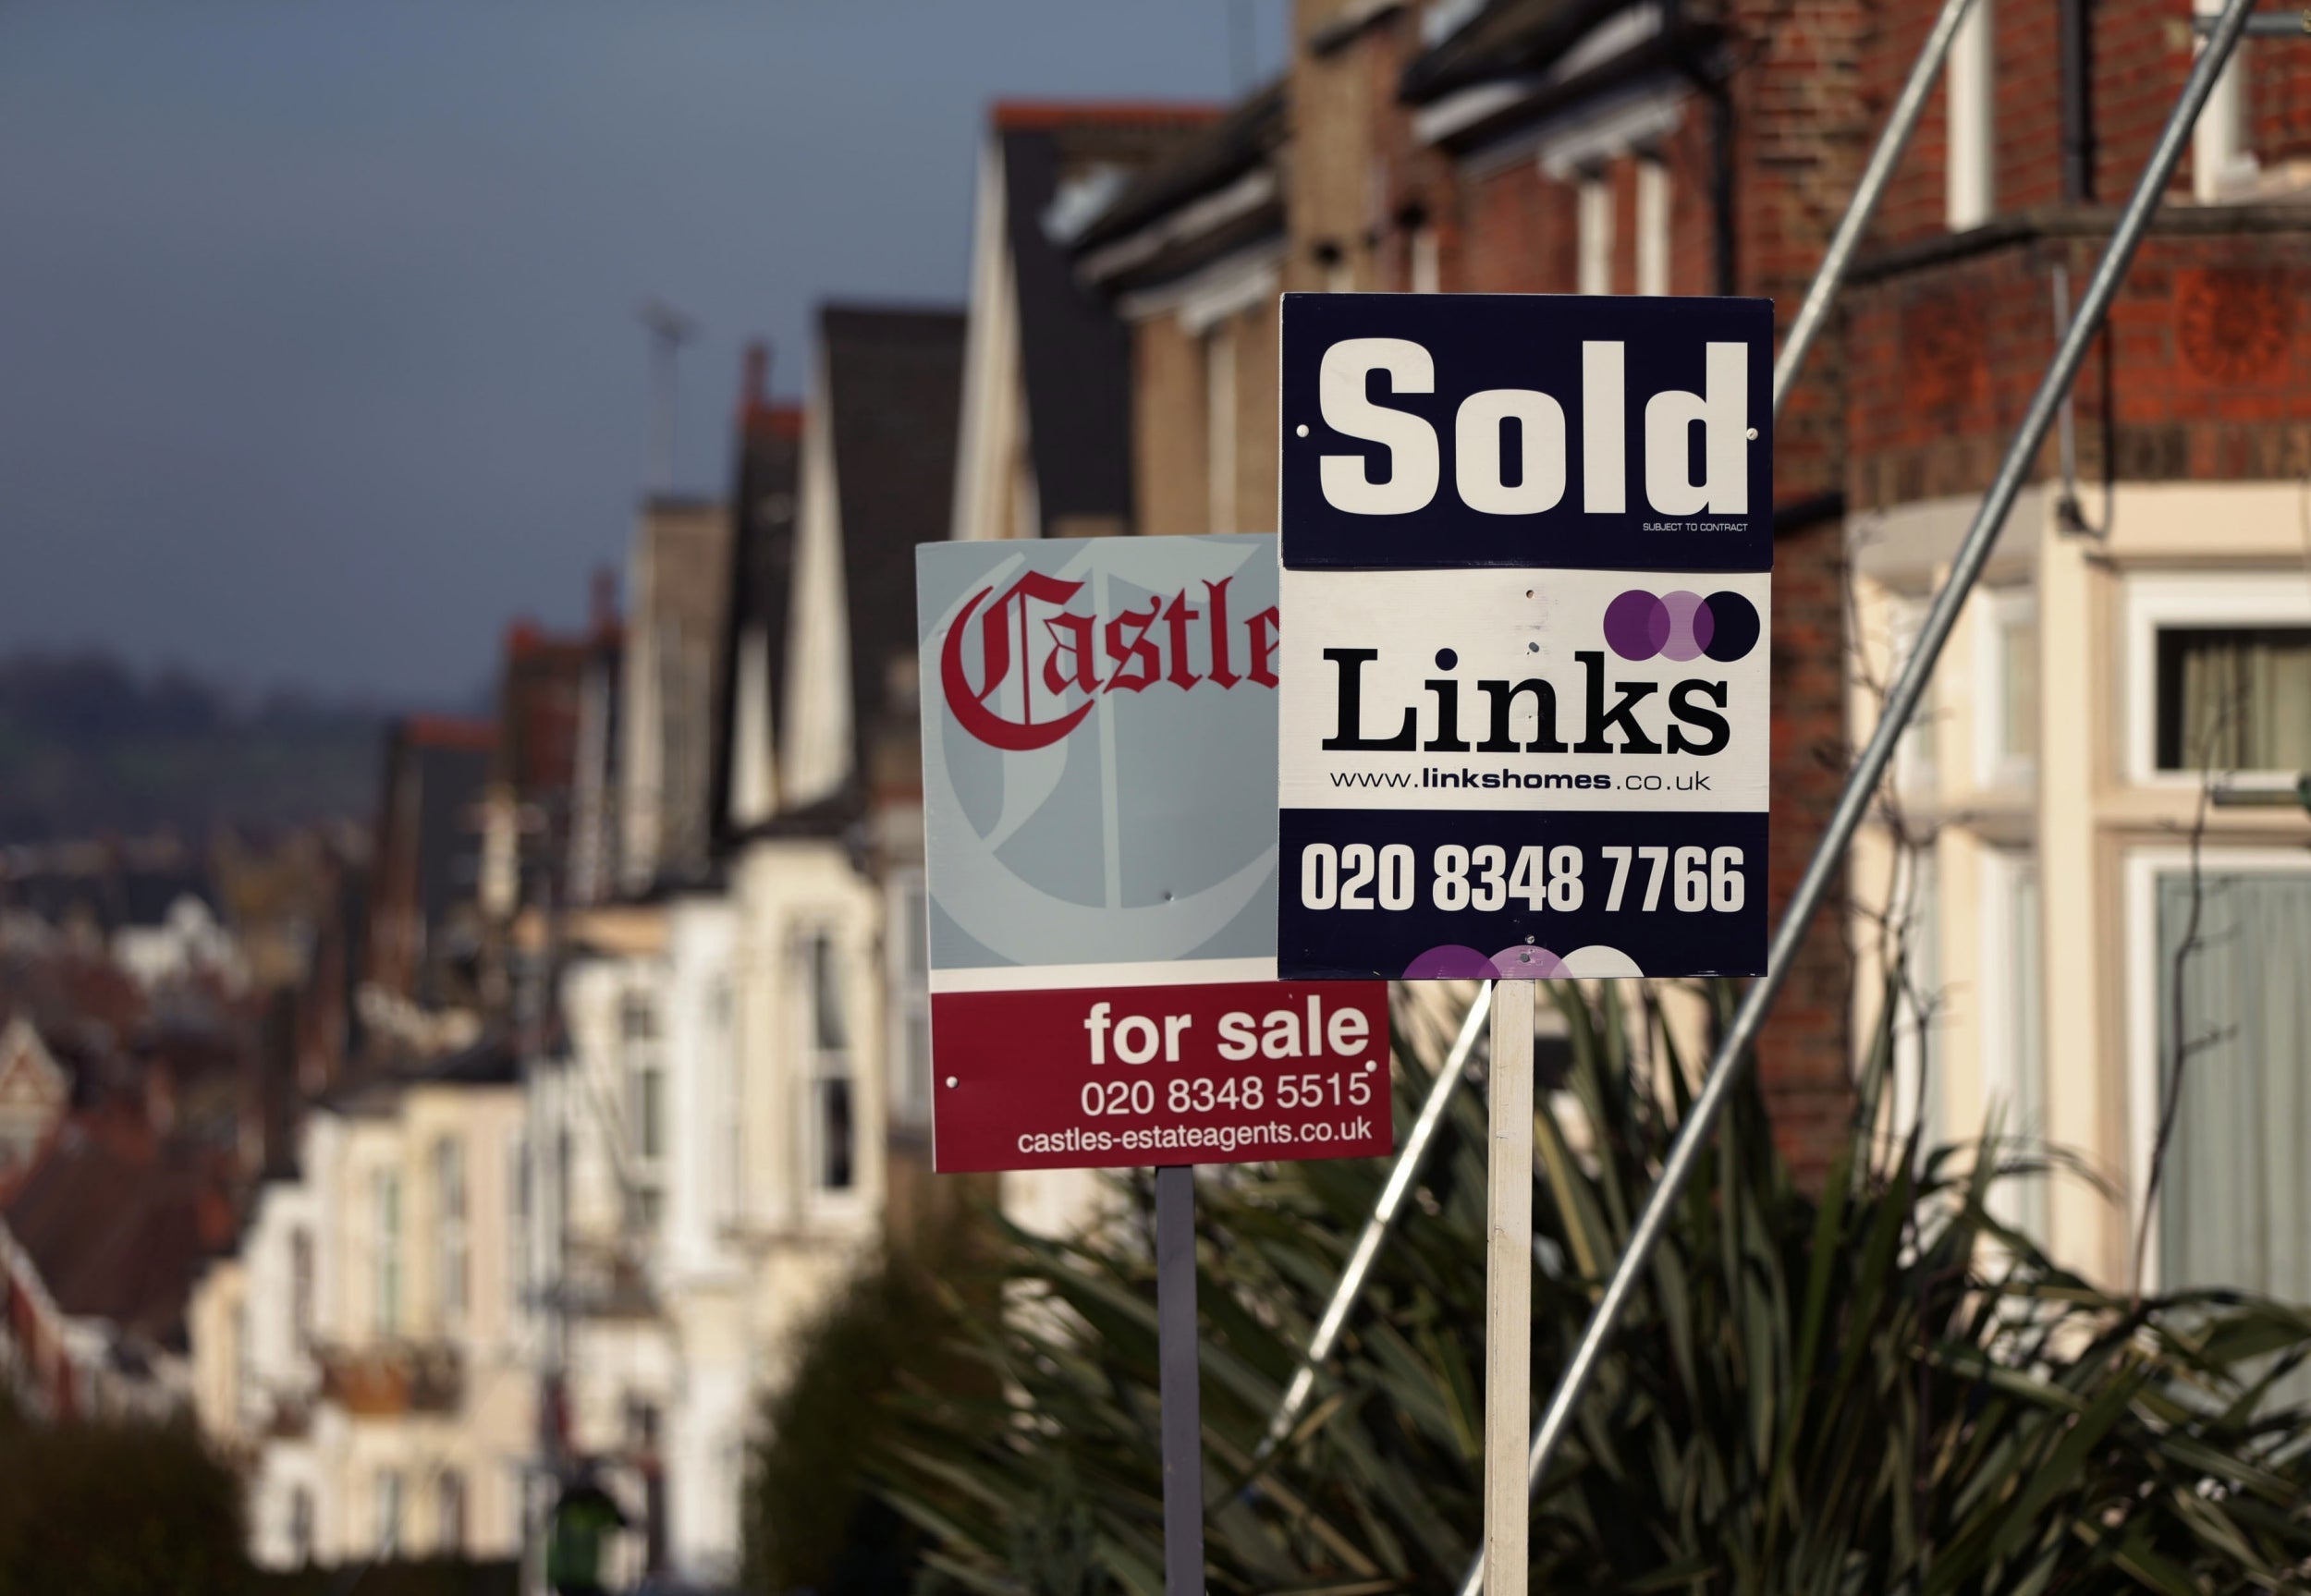 House sales jumped 6% over the month to 10 August compared with a year ago